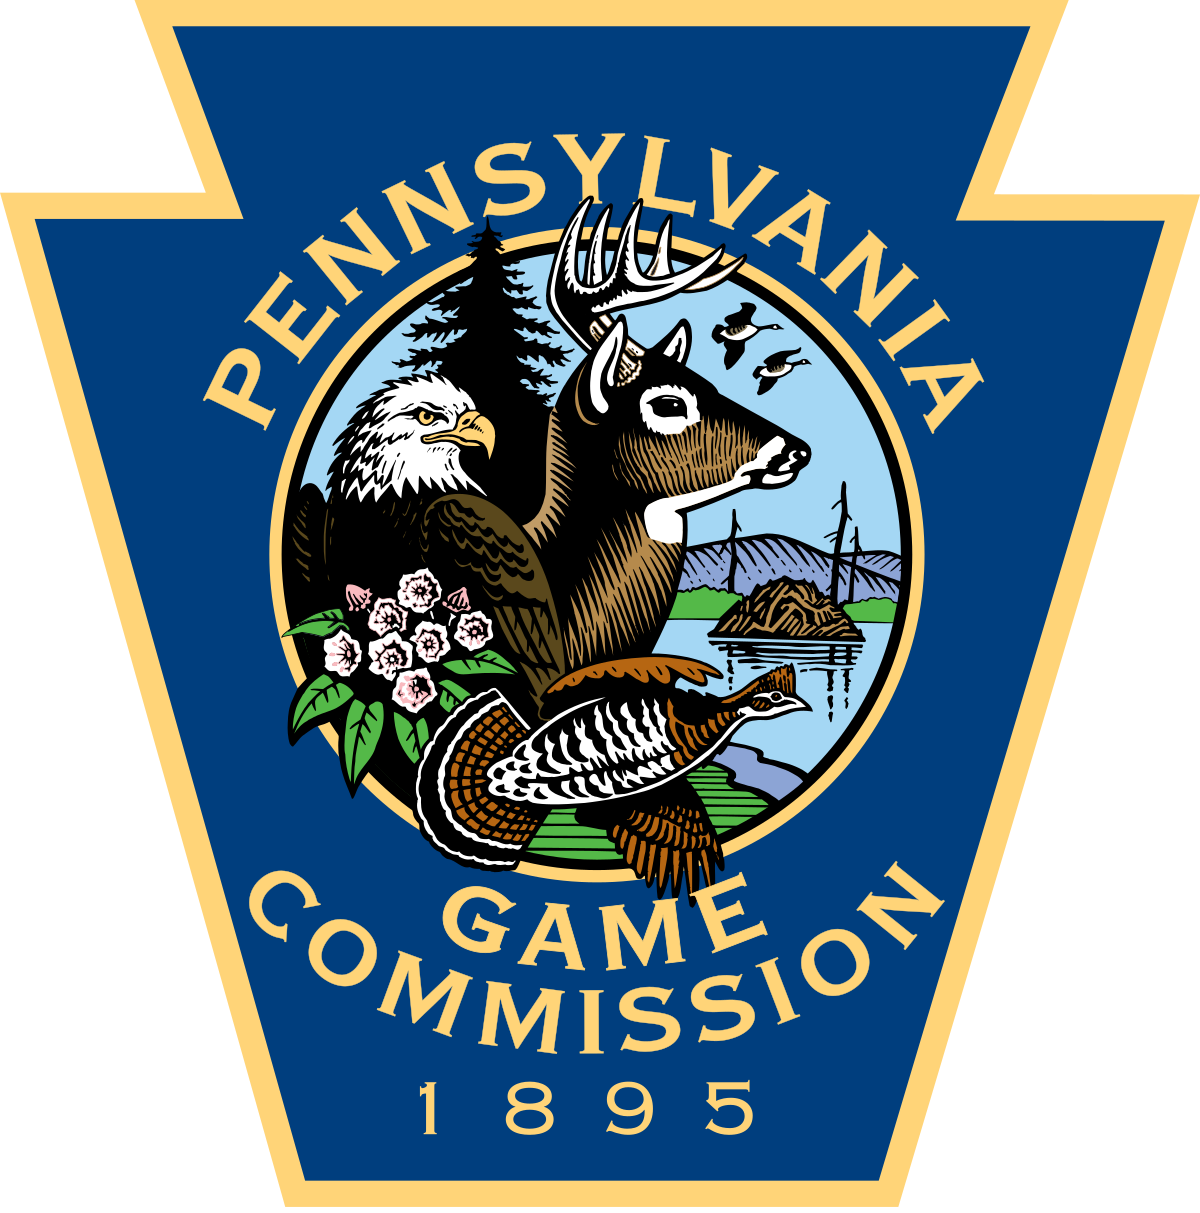 Link to the Pennsylvania Game Commission's website